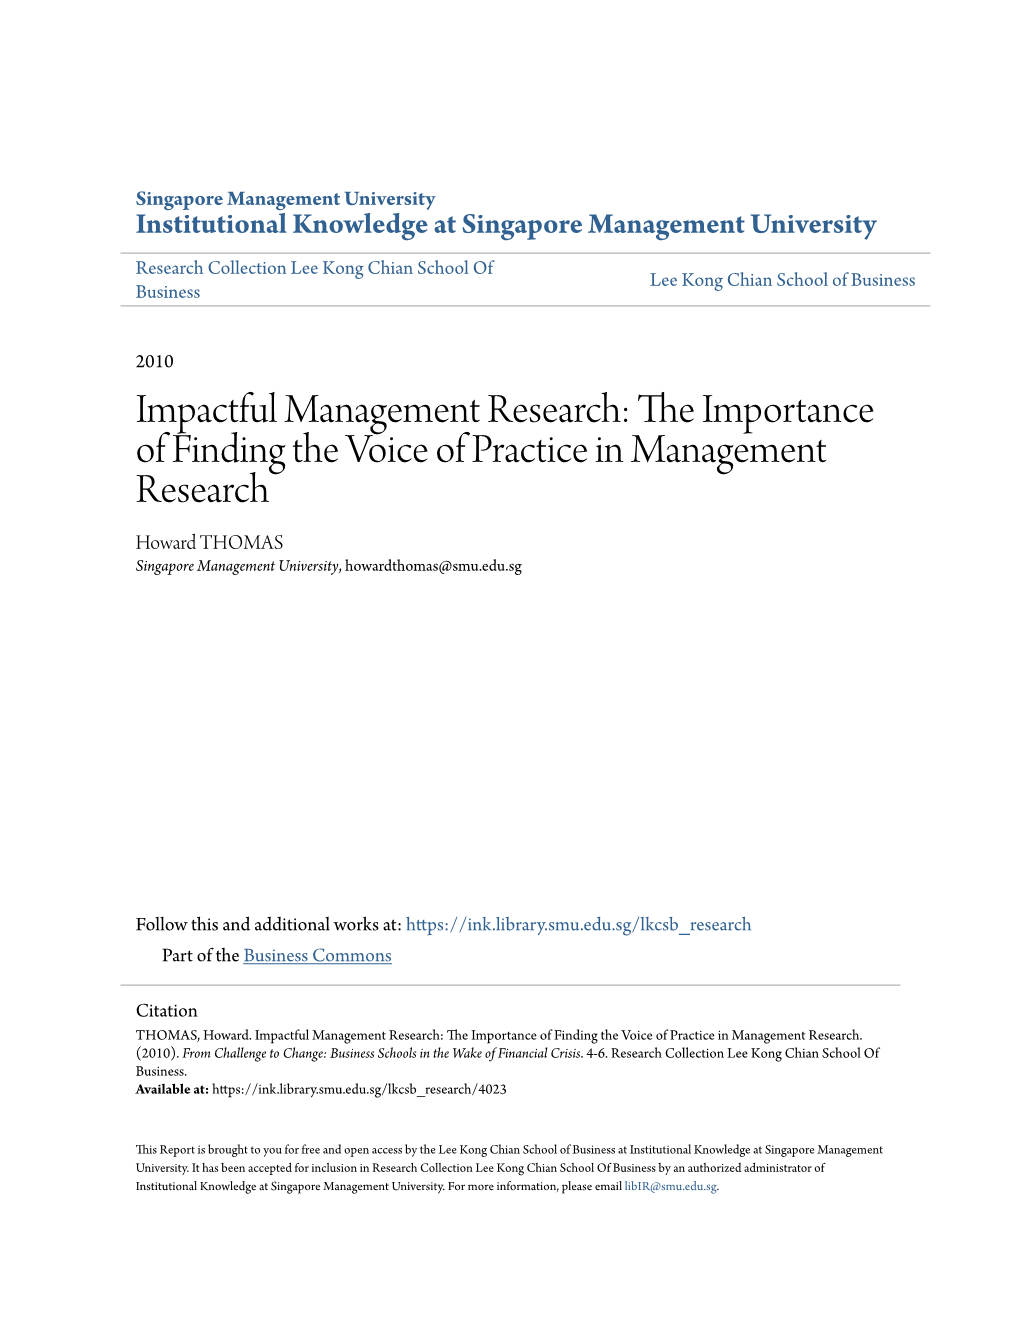 Impactful Management Research